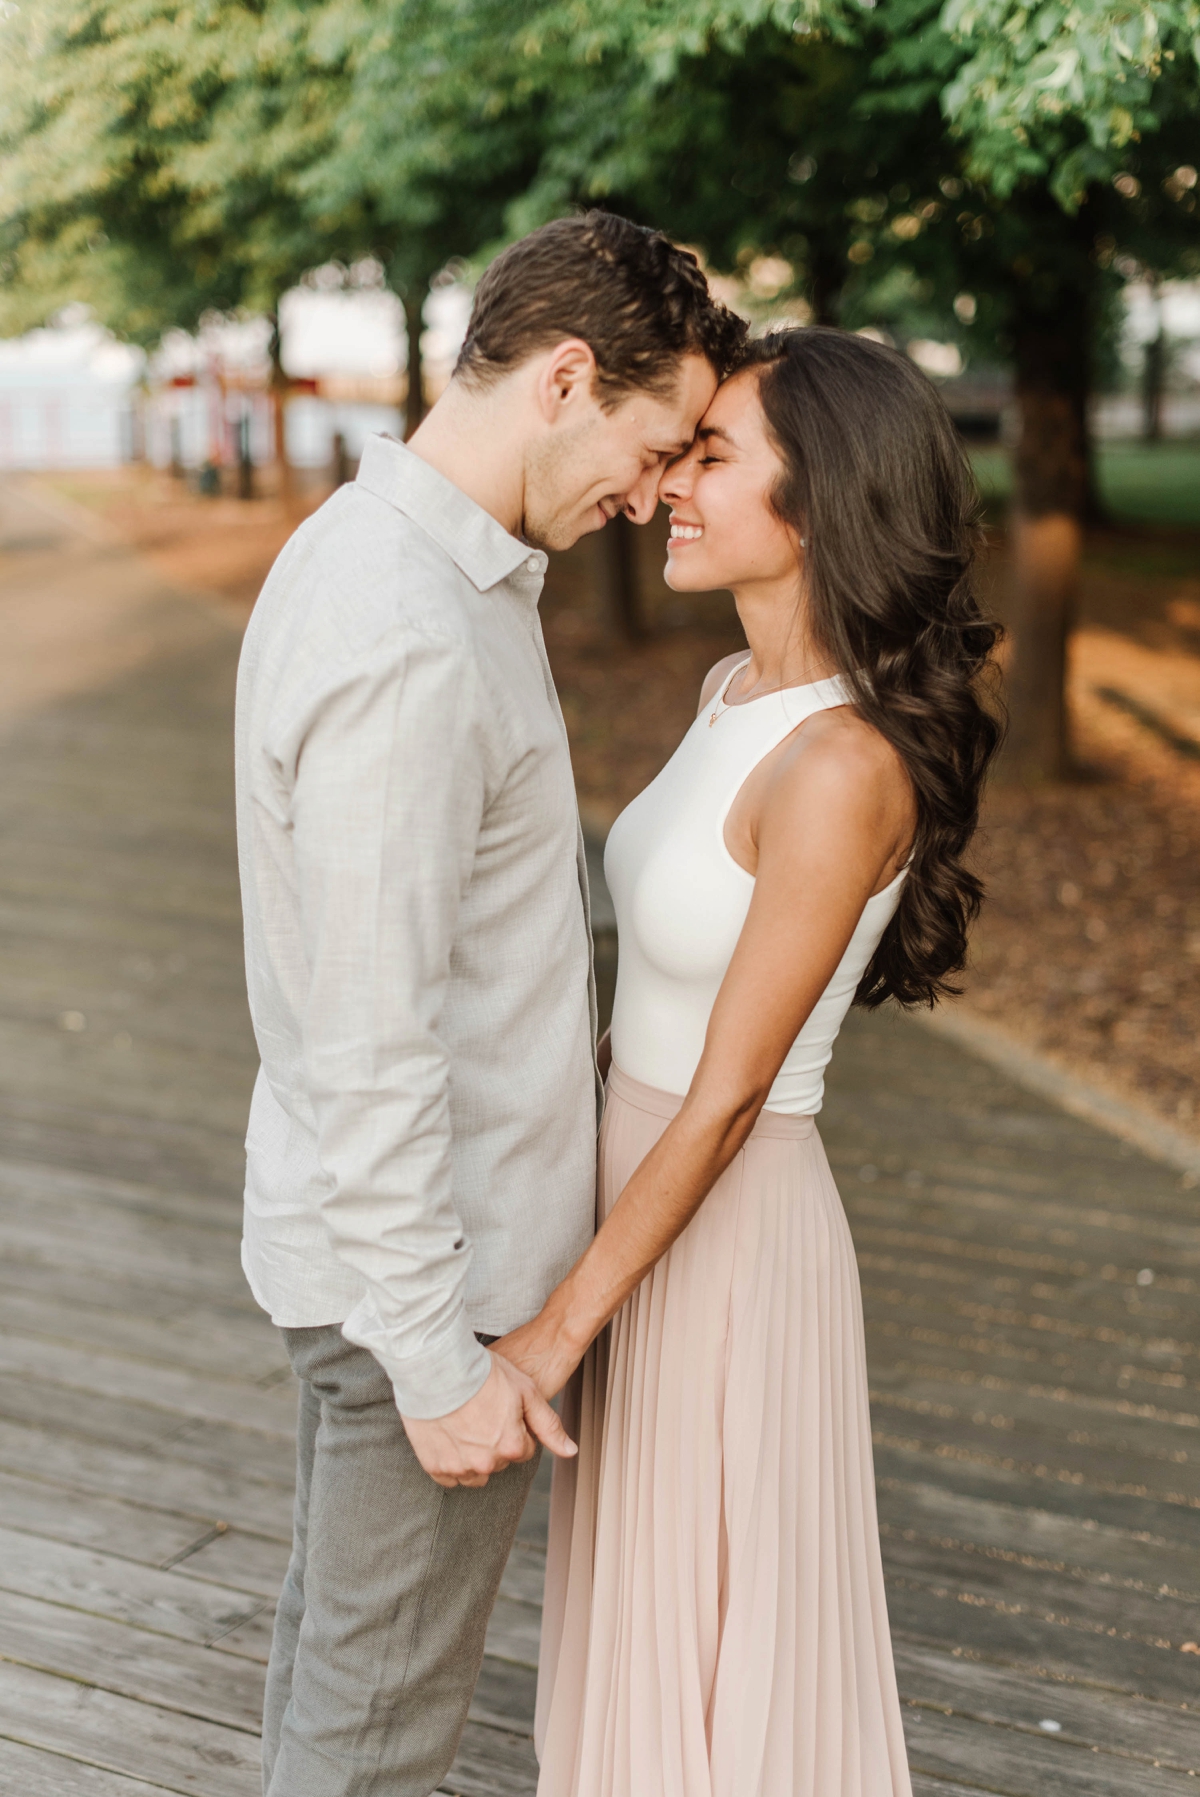 This summer portrait session features a Dry Dock, Boston Engagement Session captured by Boston Wedding Photographer Annmarie Swift